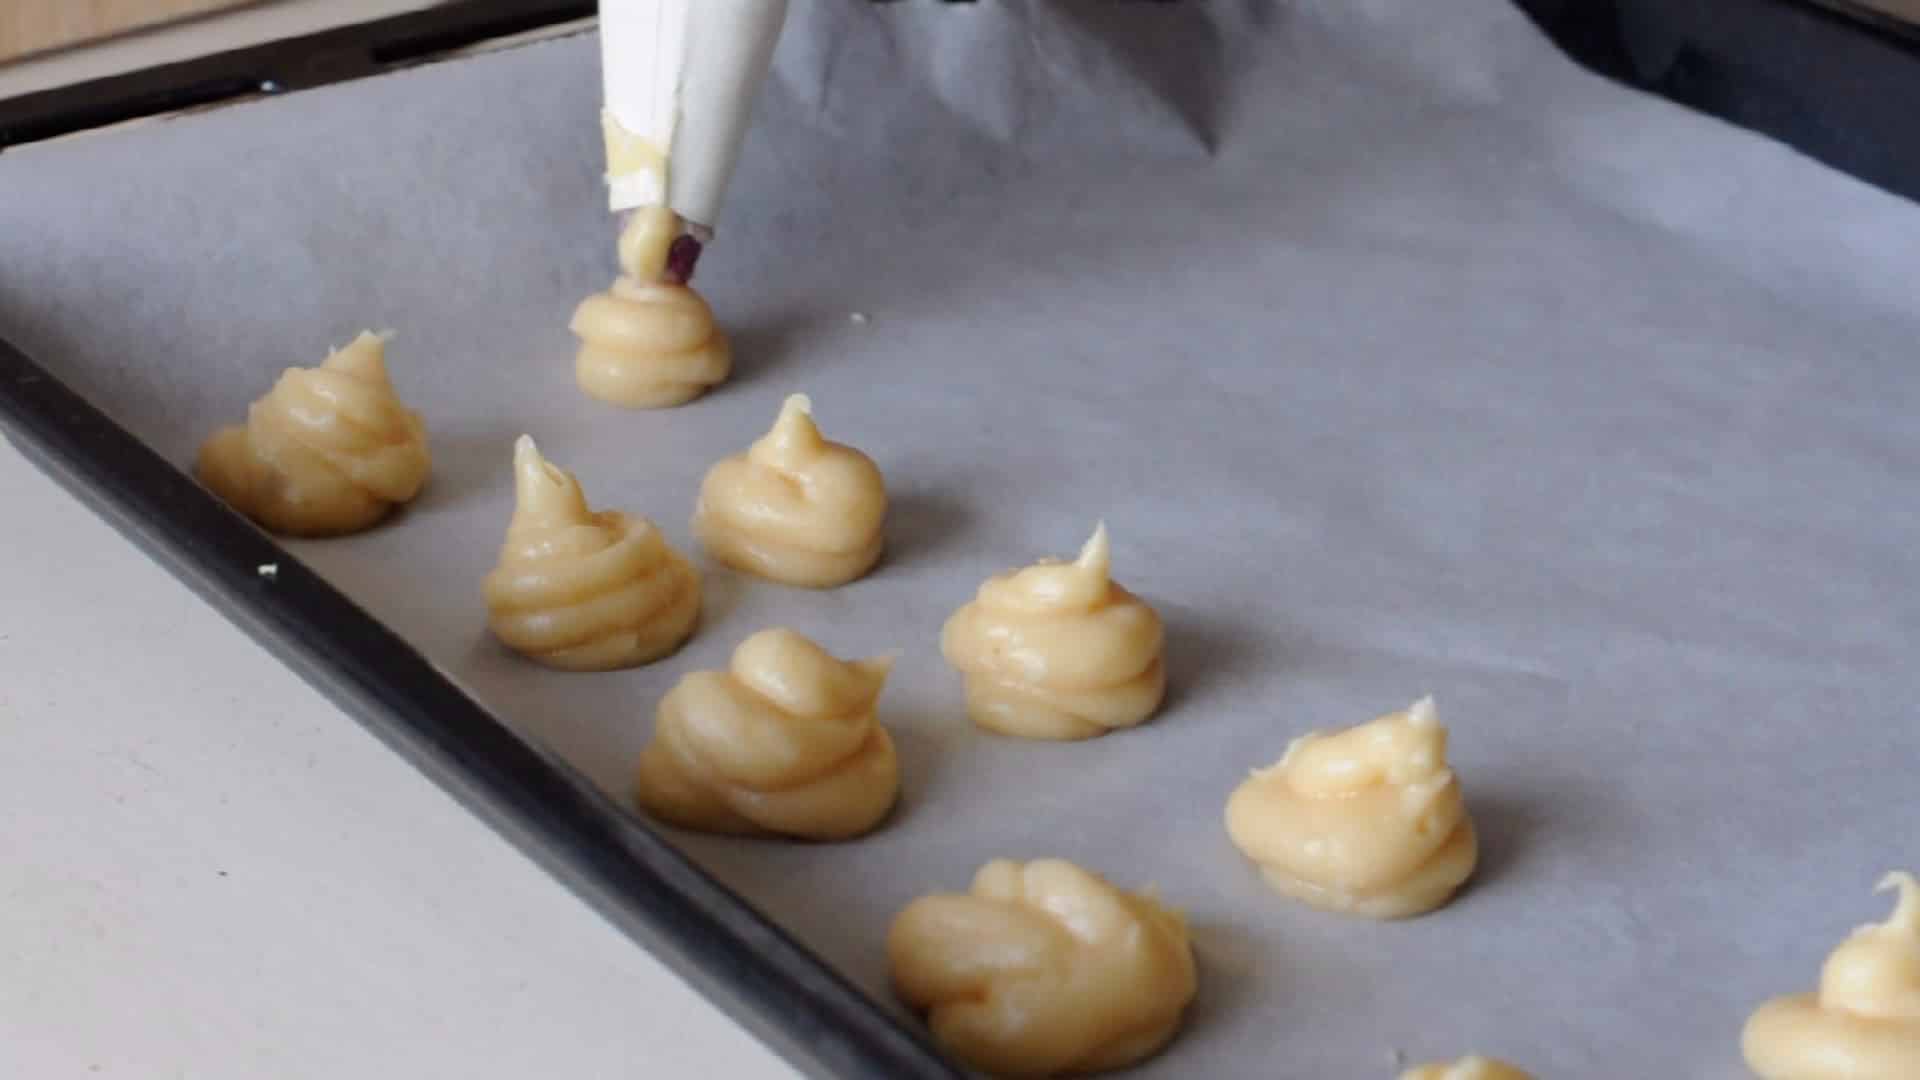 Piping the choux buns